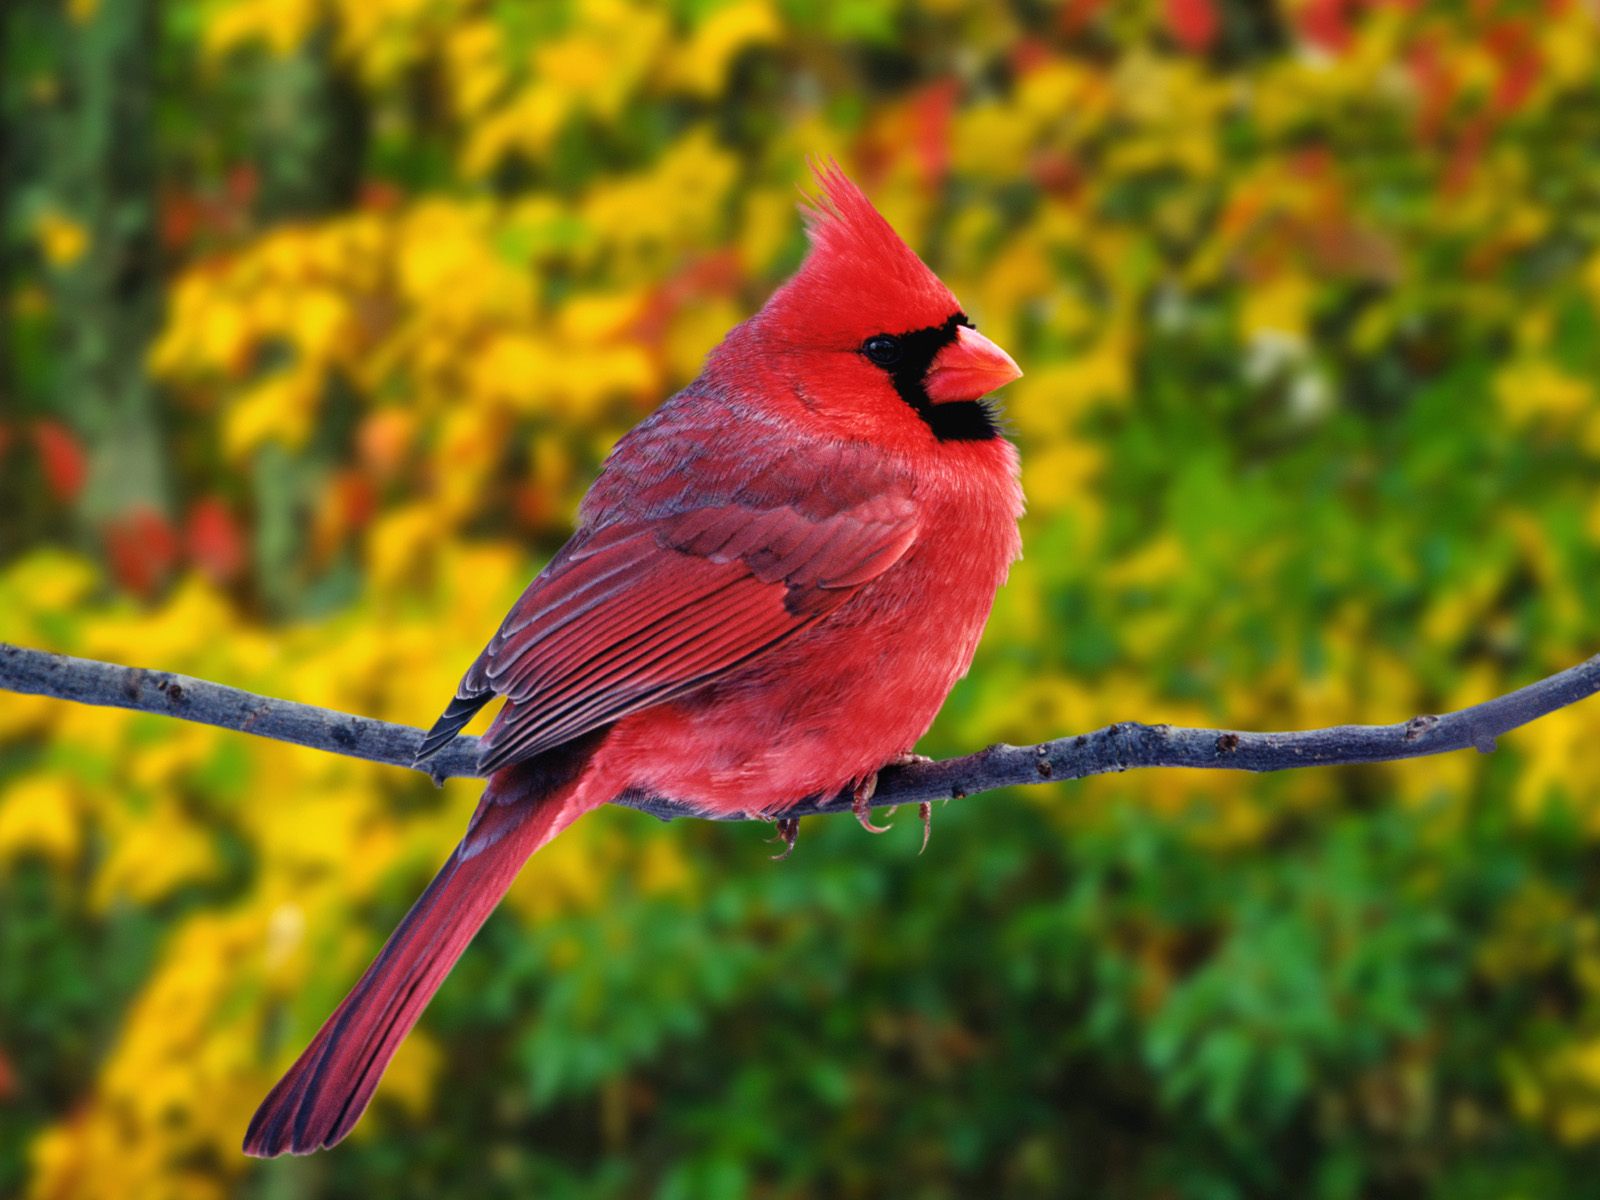 Colorful bird perched on a branch.